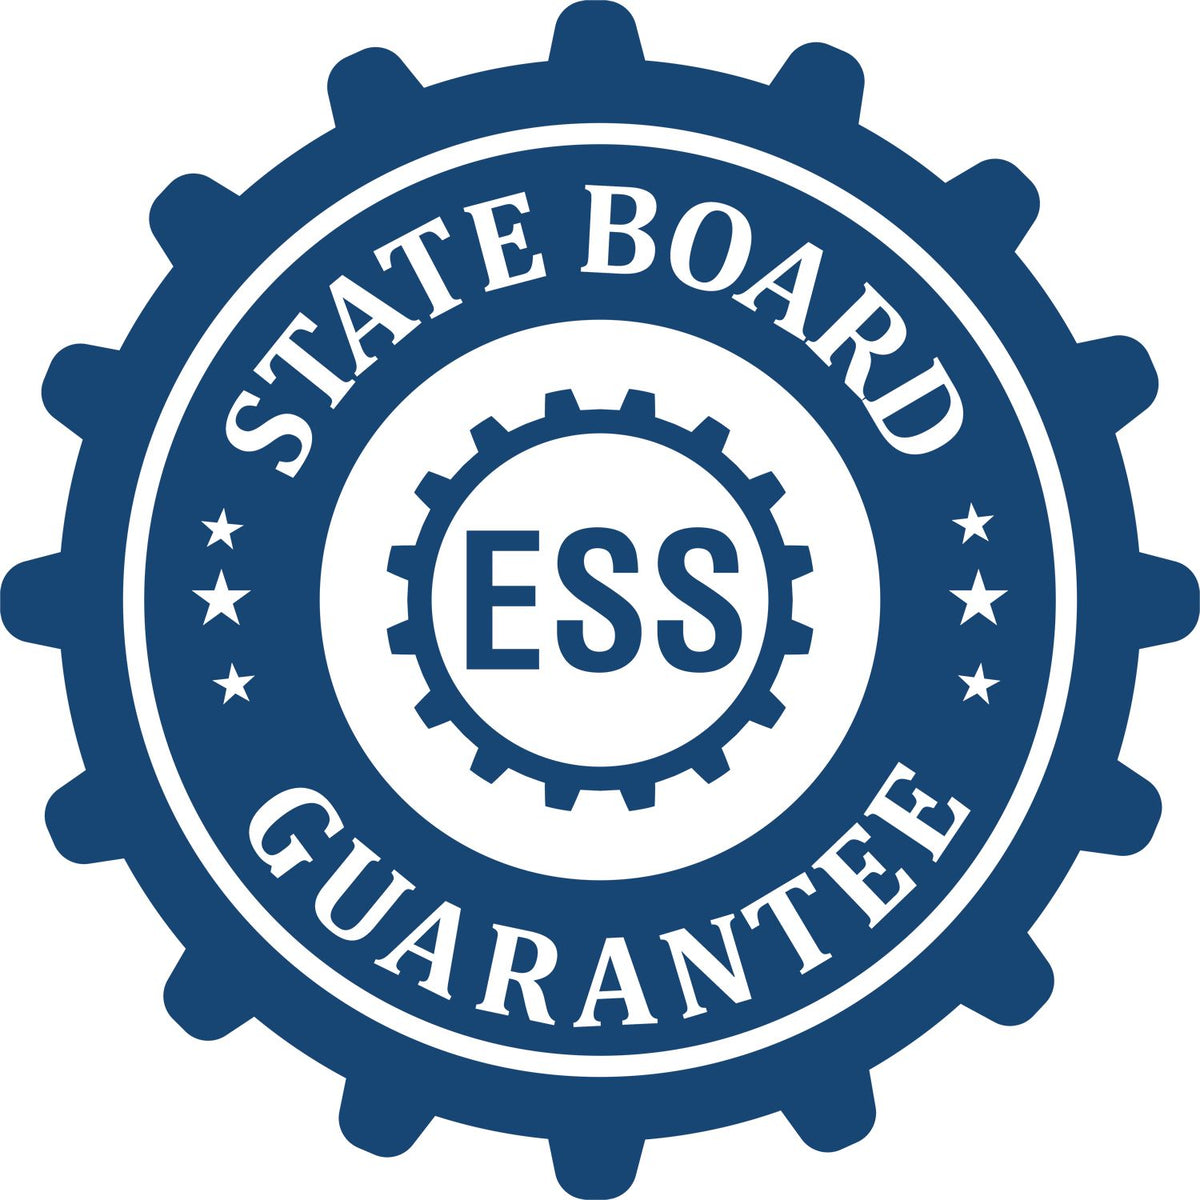 An emblem in a gear shape illustrating a state board guarantee for the Texas Landscape Architectural Seal Stamp product.